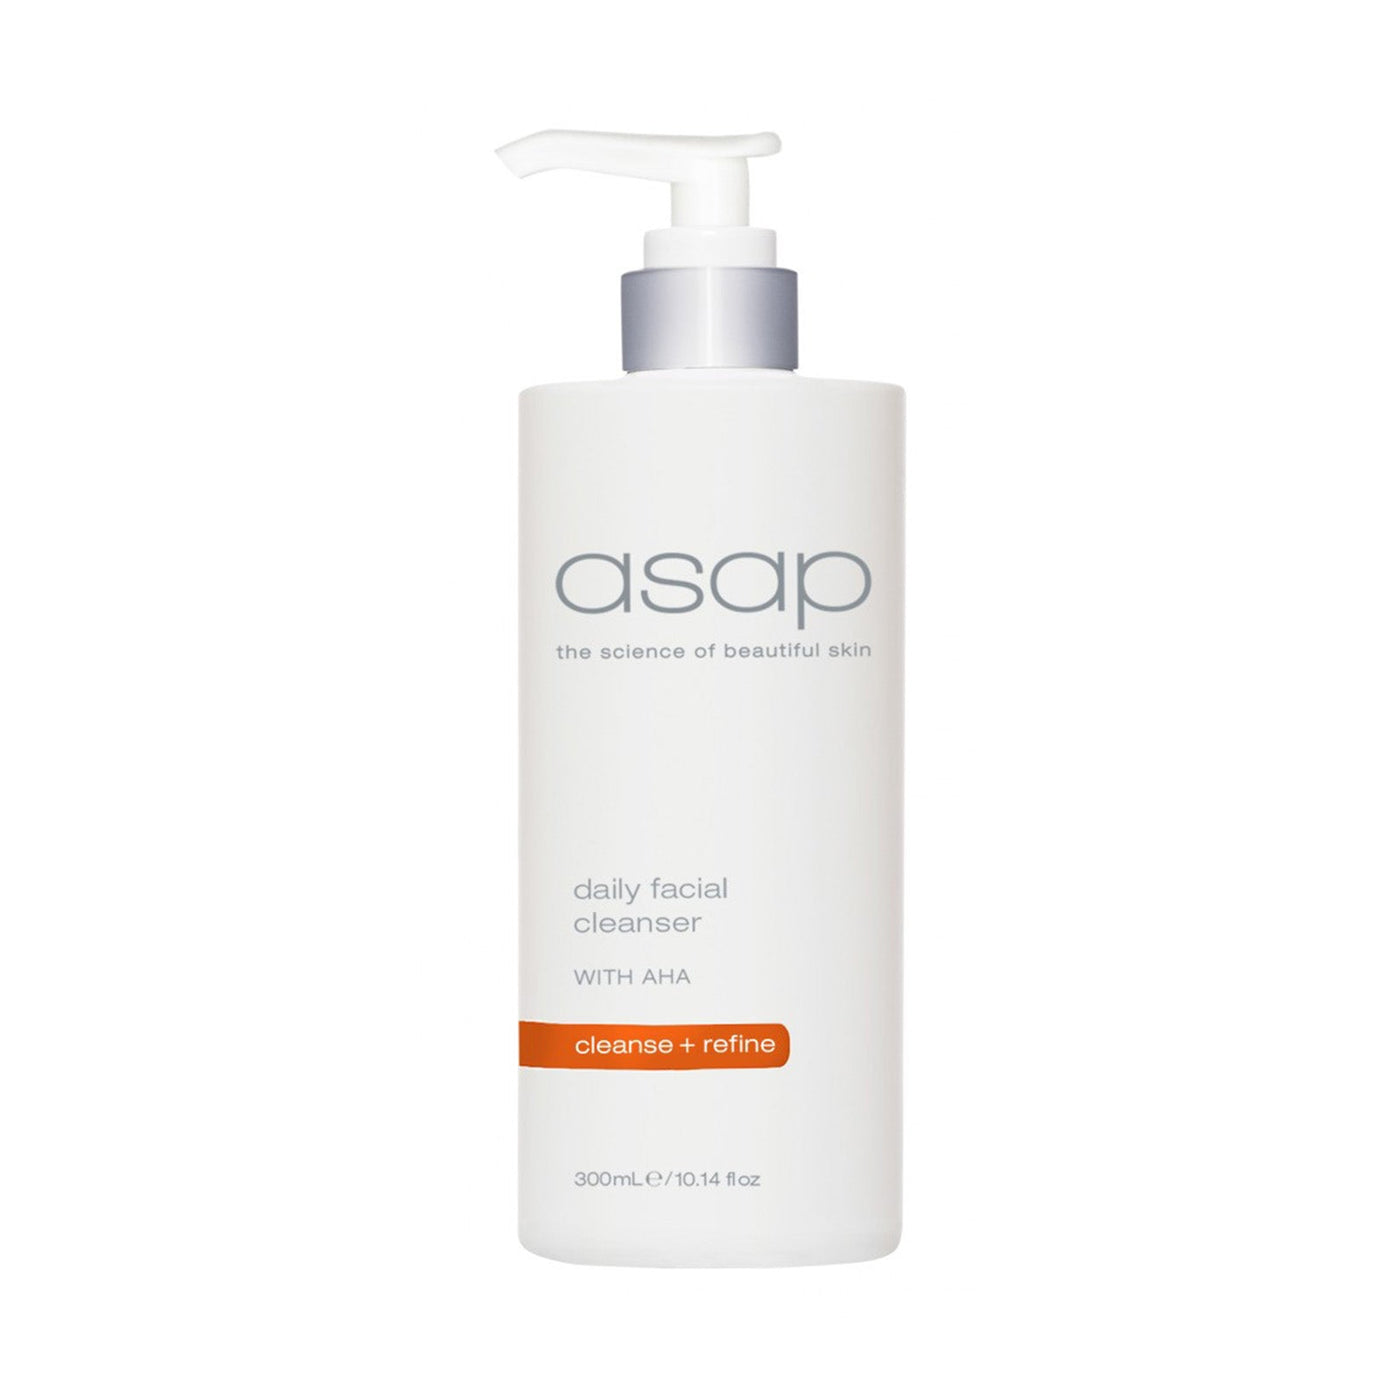 asap Daily Facial Cleanser 300ml - Limited Edition